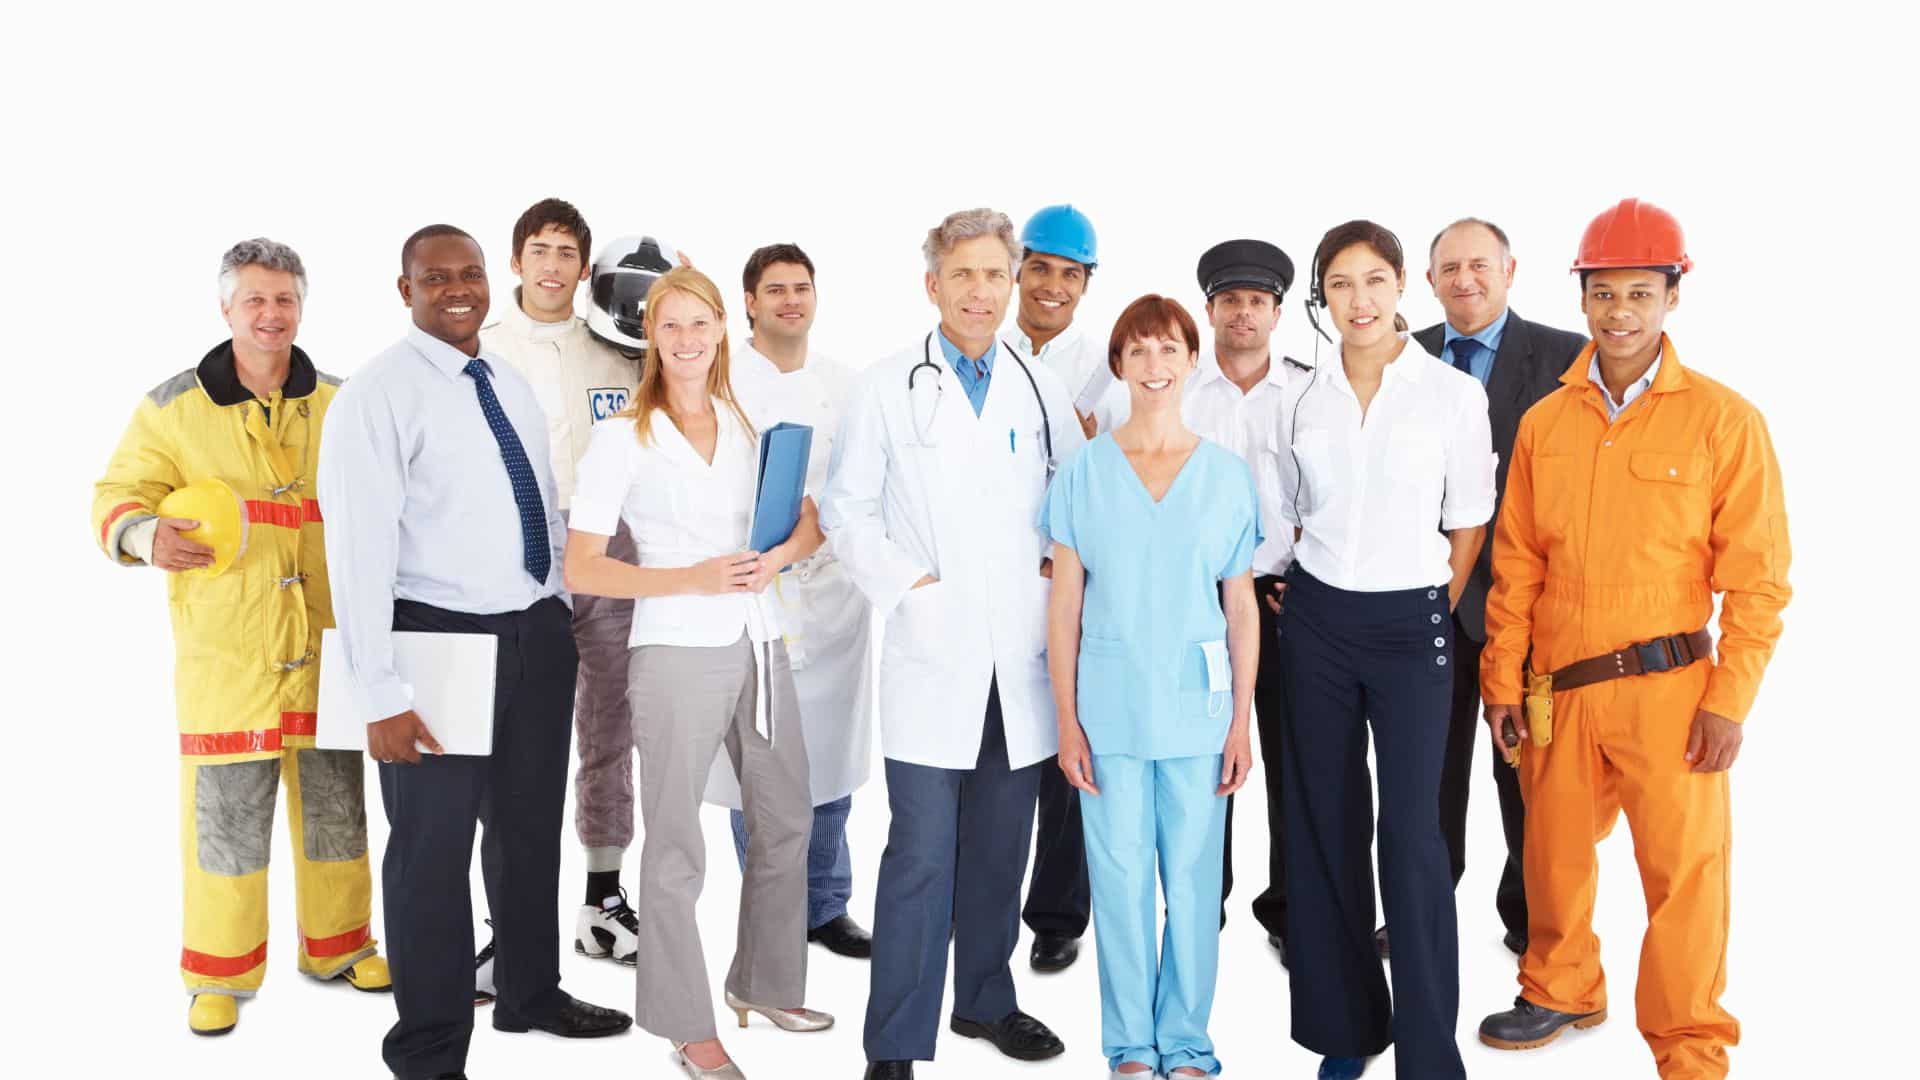 group of people from various professional background like doctor, nurse, firefighter, engineer, lawyer